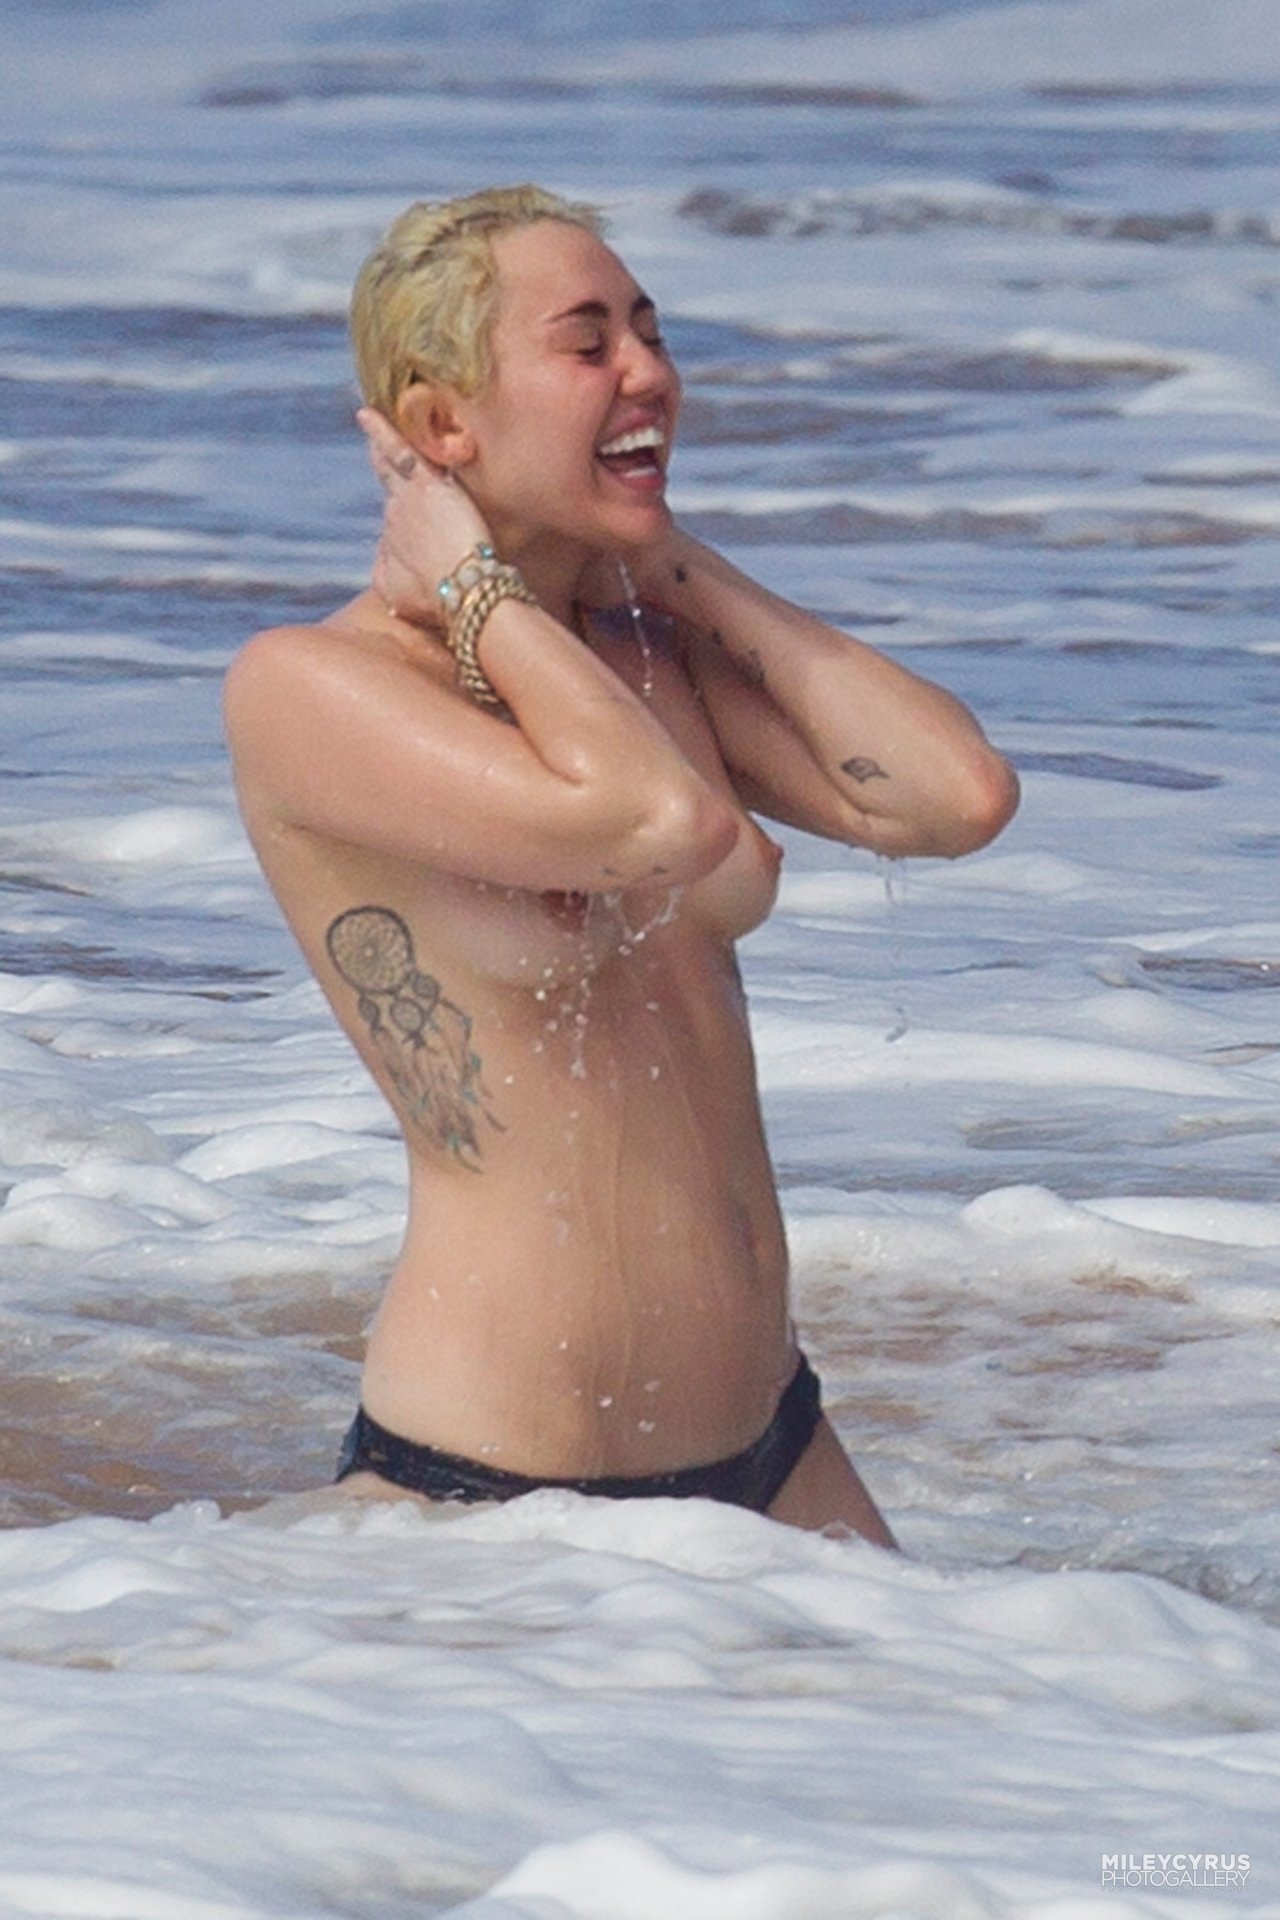 Miley cyrus nude video banned